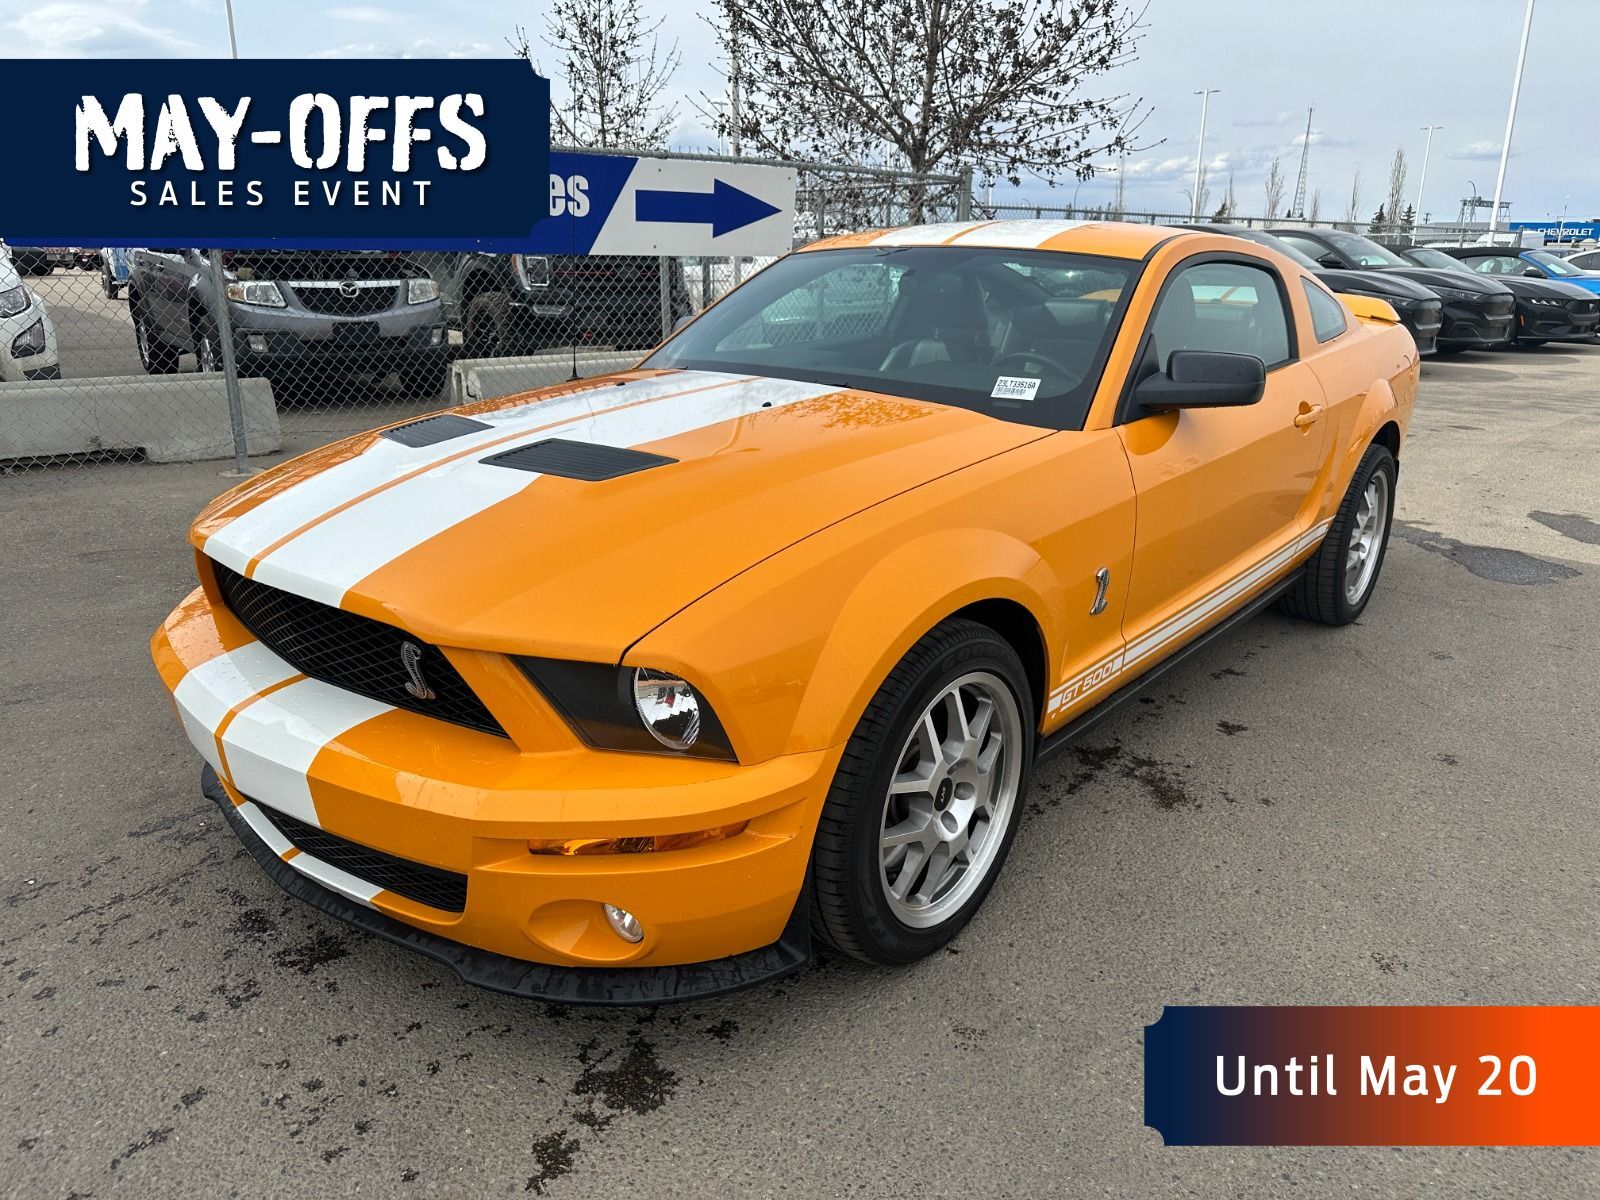 2007 Ford Mustang SHELBY COUPE, 5.4L, SC 32V-V8 ENG, KEYLESS ENTRY, 